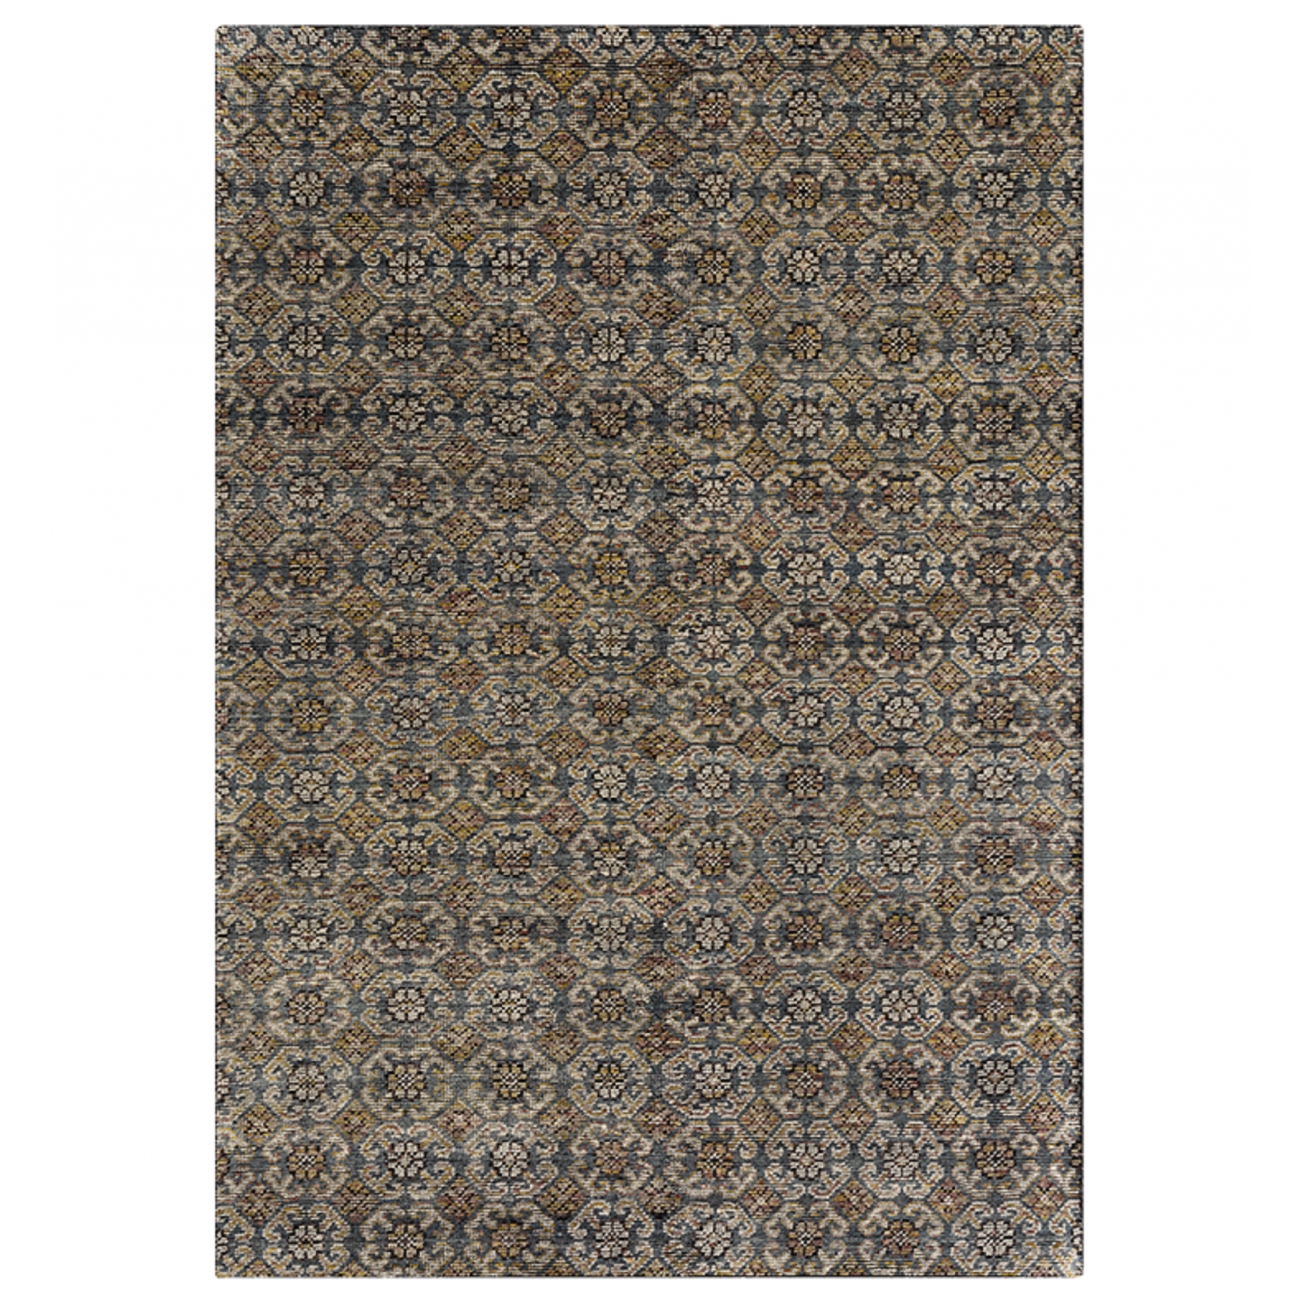 Gan Rug Hand Knotted Hidraulic Tappeto